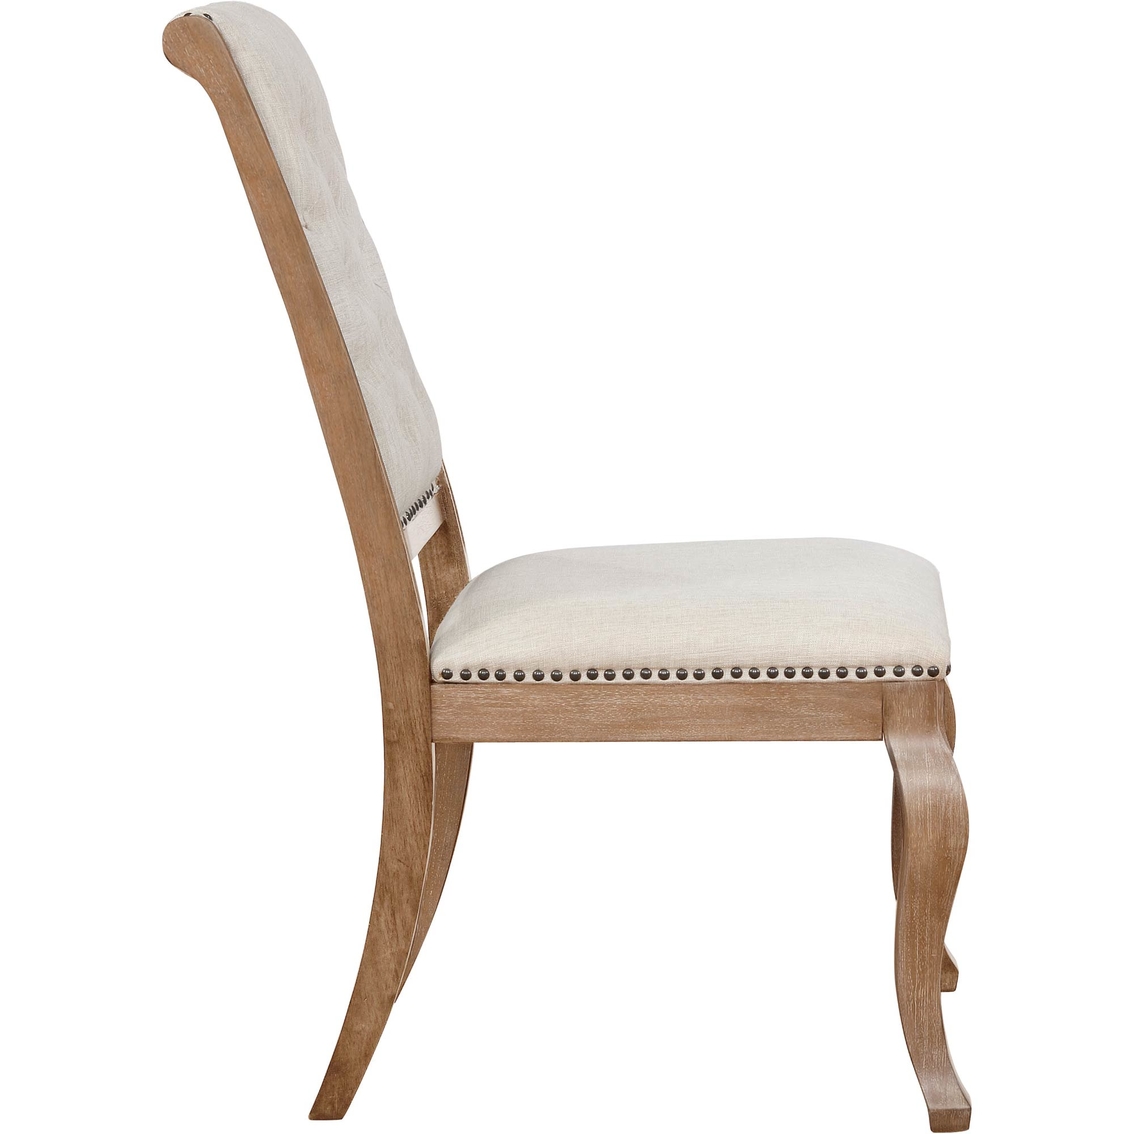 Coaster Glen Cove Dining Chair with Trim 2 pk. - Image 3 of 3